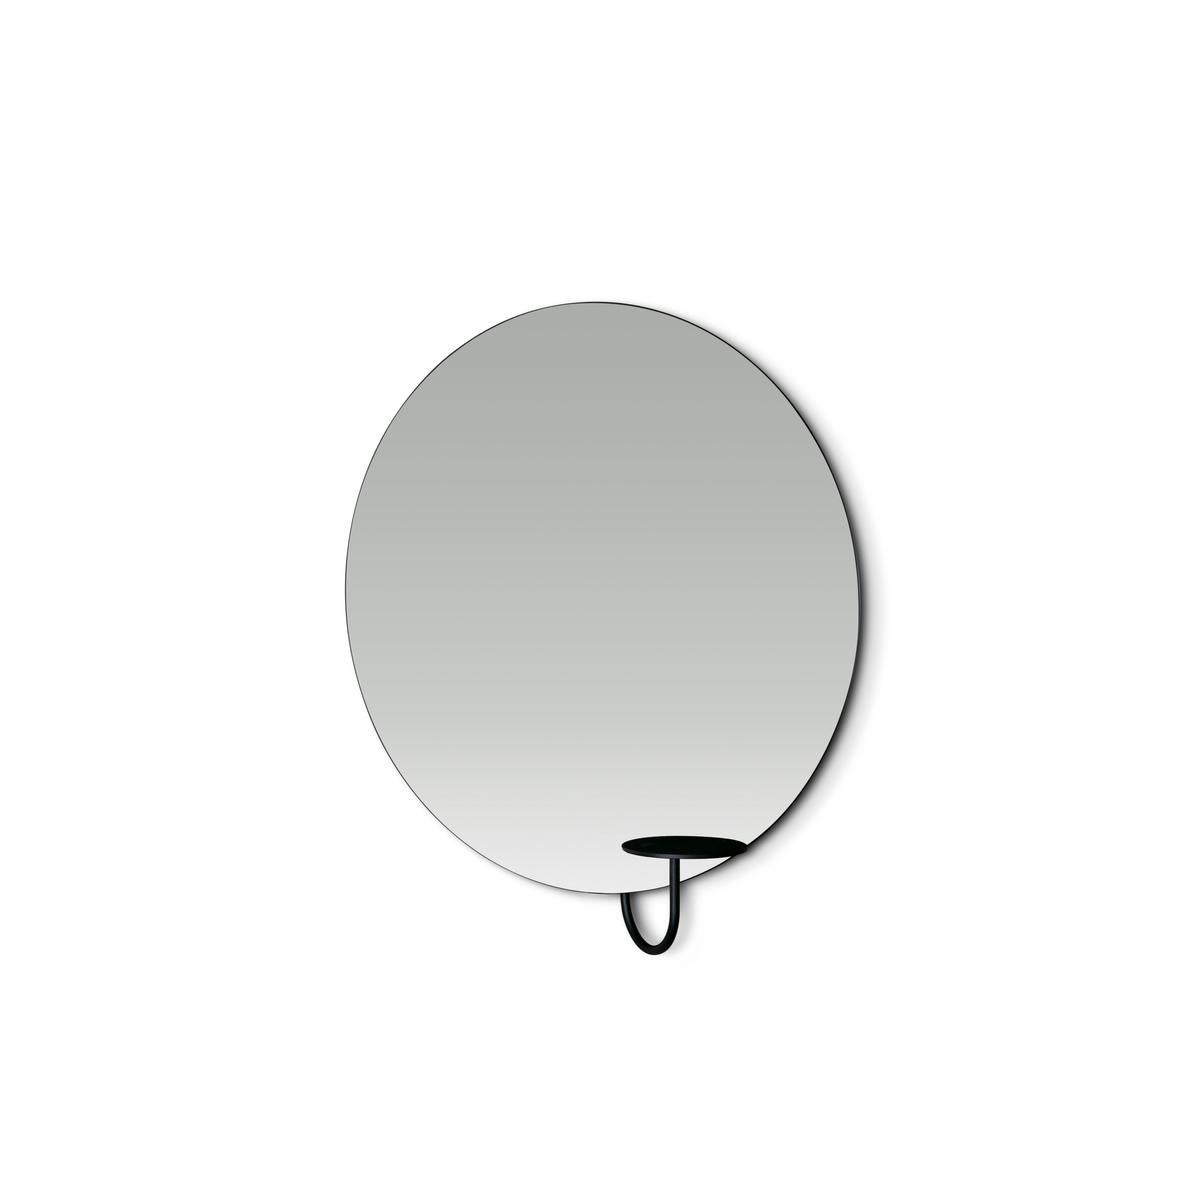 Miró Miró
Wall mirror
Design: Friends & Founders

Shape: Round
Size: Small
Glass color: Clear, Grey mist or bronze
Metal finish: Black or brass


Contemporary design studio Friends & Founders was founded in 2003 by IDA Linea and Rasmus